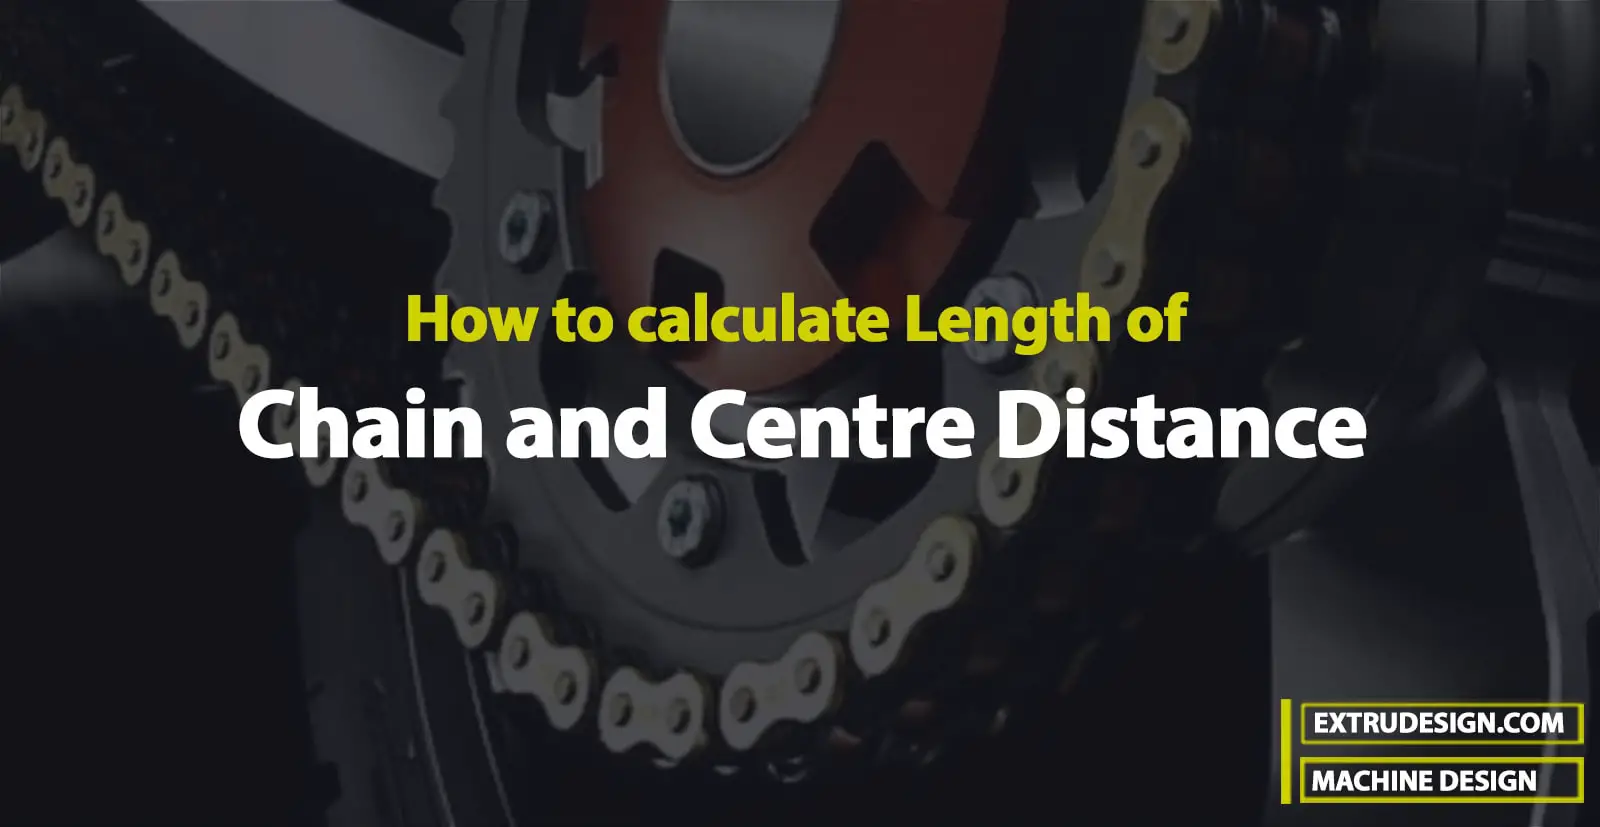 How to calculate Length of Chain and Centre Distance